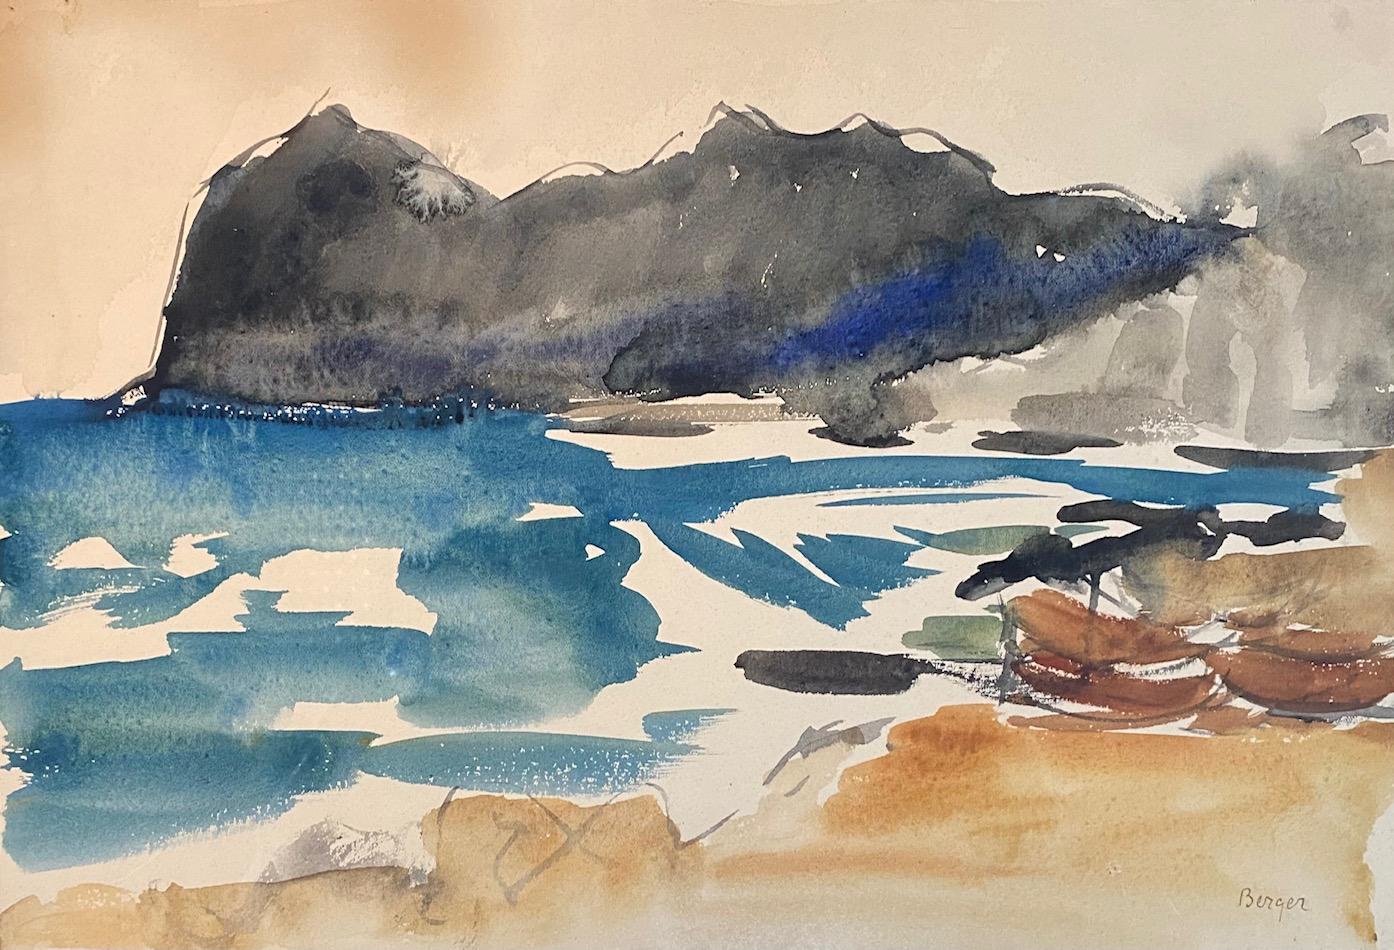 Watercolor on paper sold with frame 
Total size with frame 45x34 cm
Hans BERGER is an artist born in Switzerland in 1882 and died in 1977. His works have been sold at public auction 513 times, mainly in the Painting category.